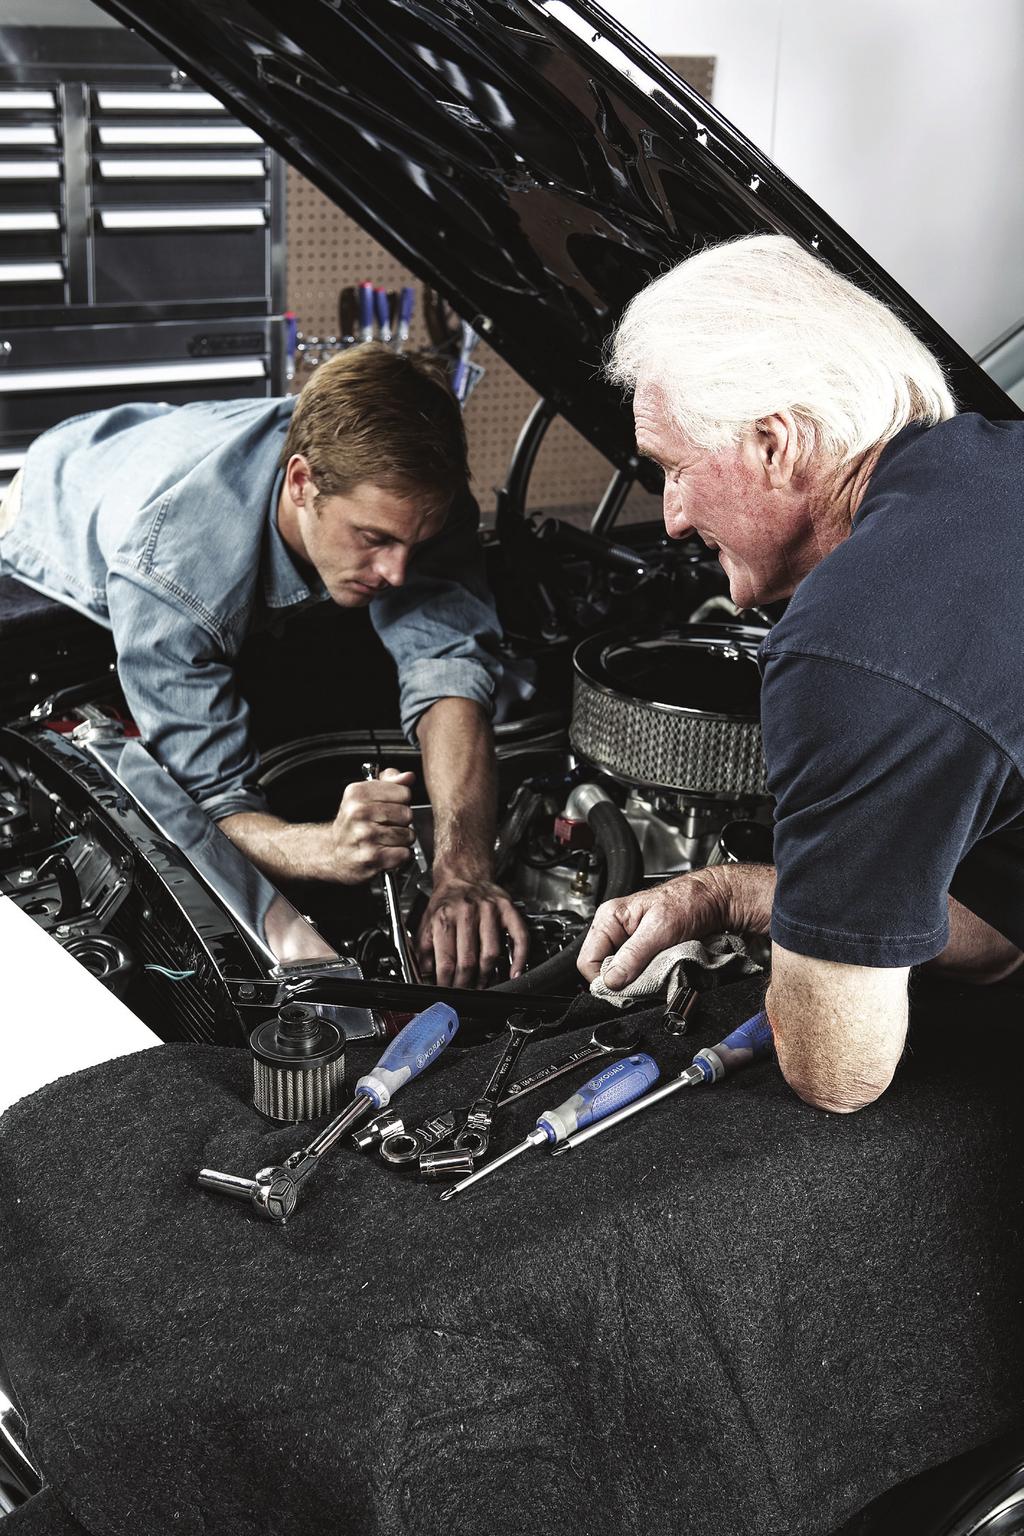 STANDS UP TO A LIFETIME OF TUNE-UPS. When you reach into your toolbox, you want a tool you can rely on. That tool is Kobalt the tool you can count on project after project.